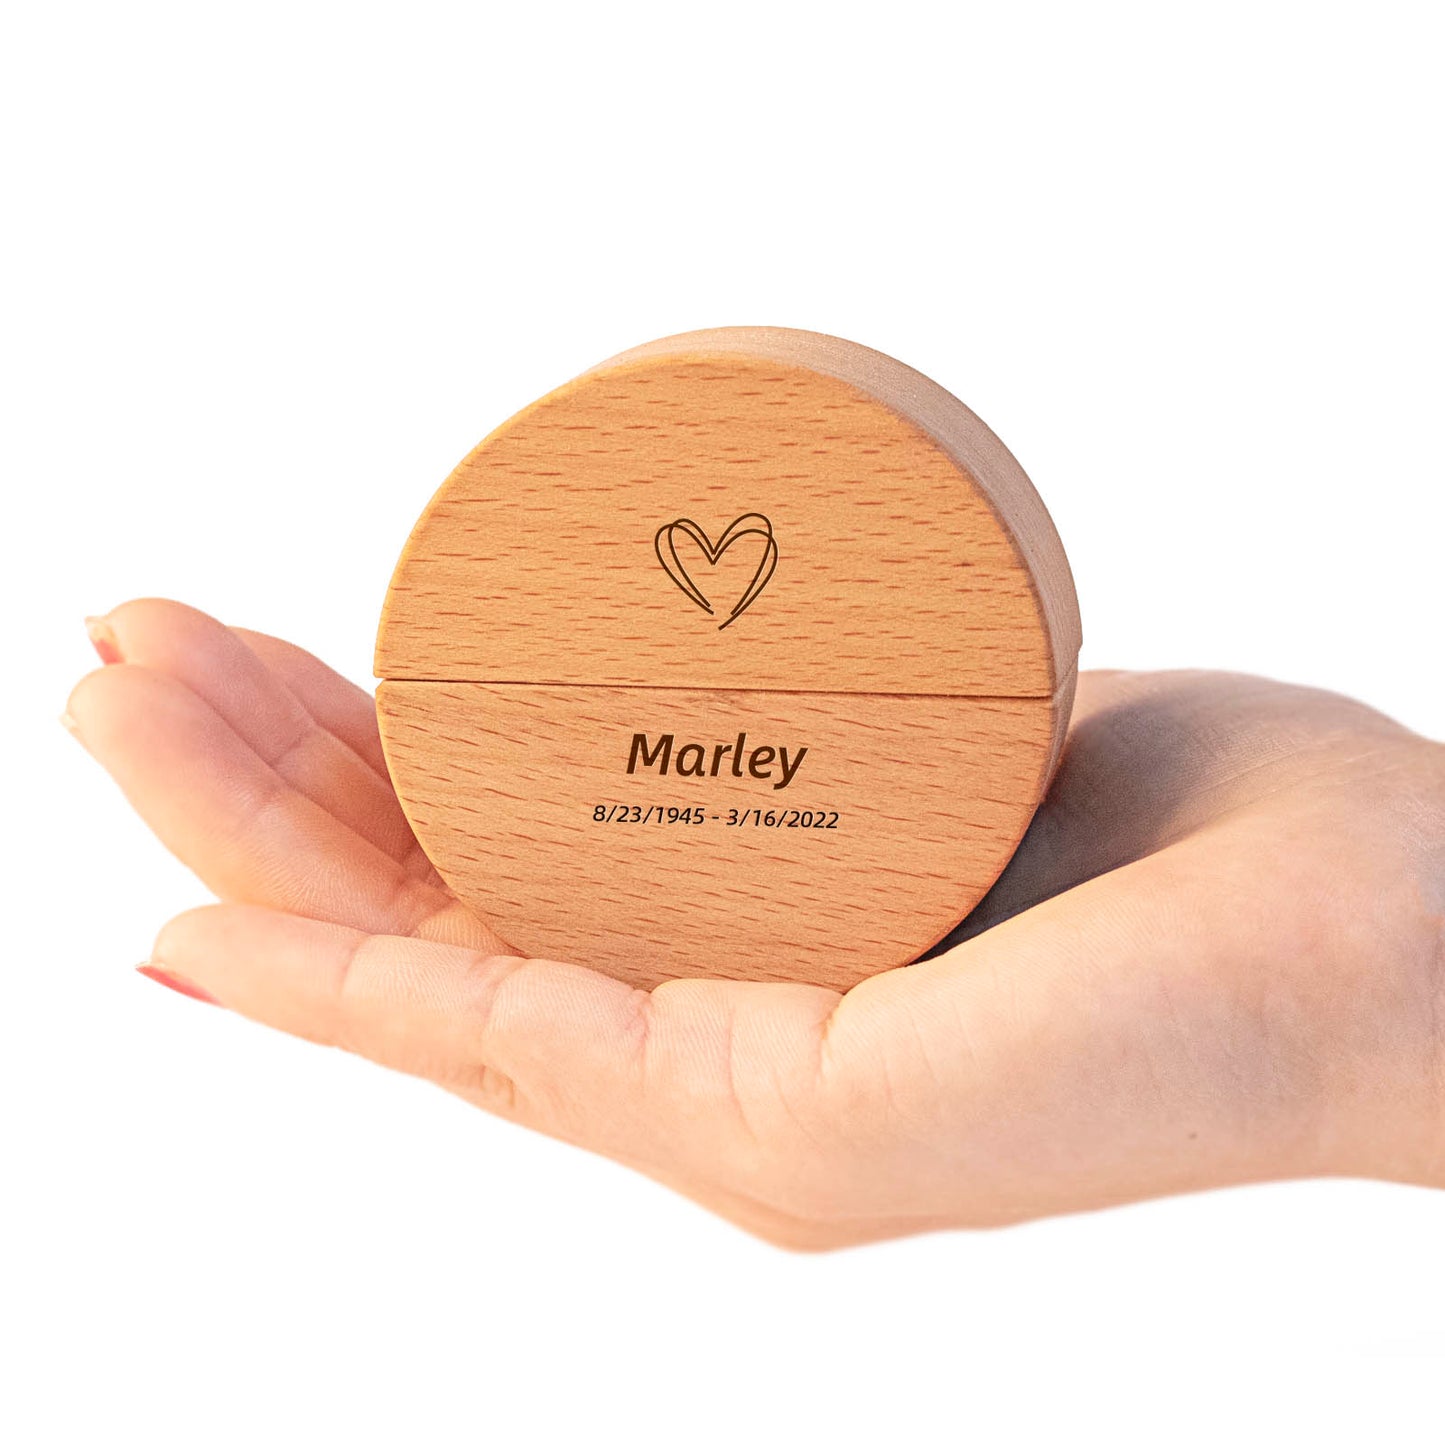 Small Keepsake Cremation Urn for Human Ashes, Custom Engraved, Mini Wooden Sharing Personal Funeral Urn for Pet or Human Ashes